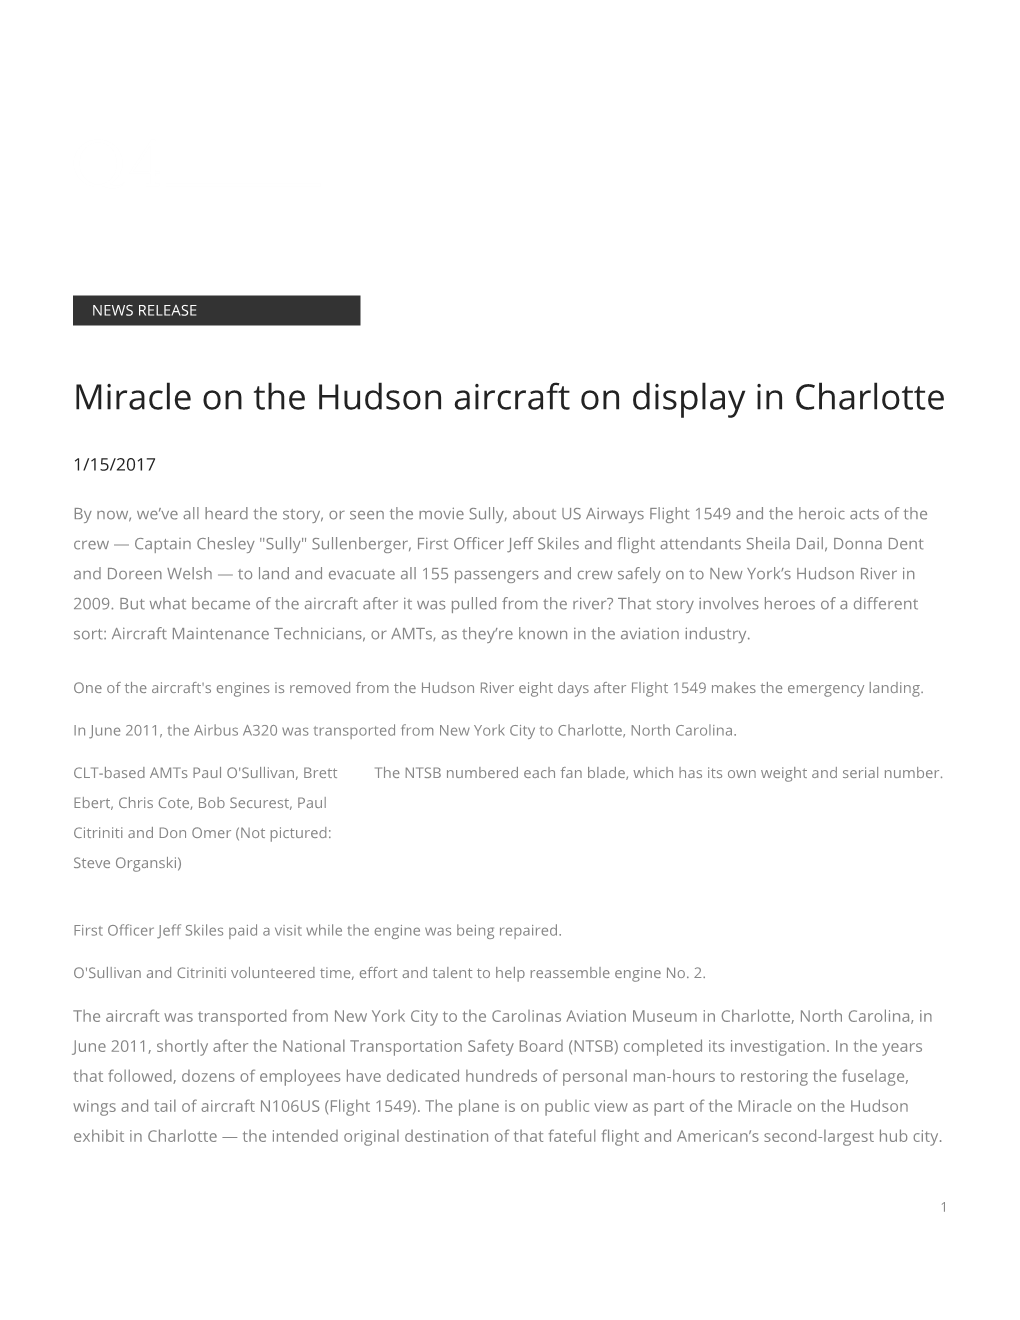 Miracle on the Hudson Aircraft on Display in Charlotte